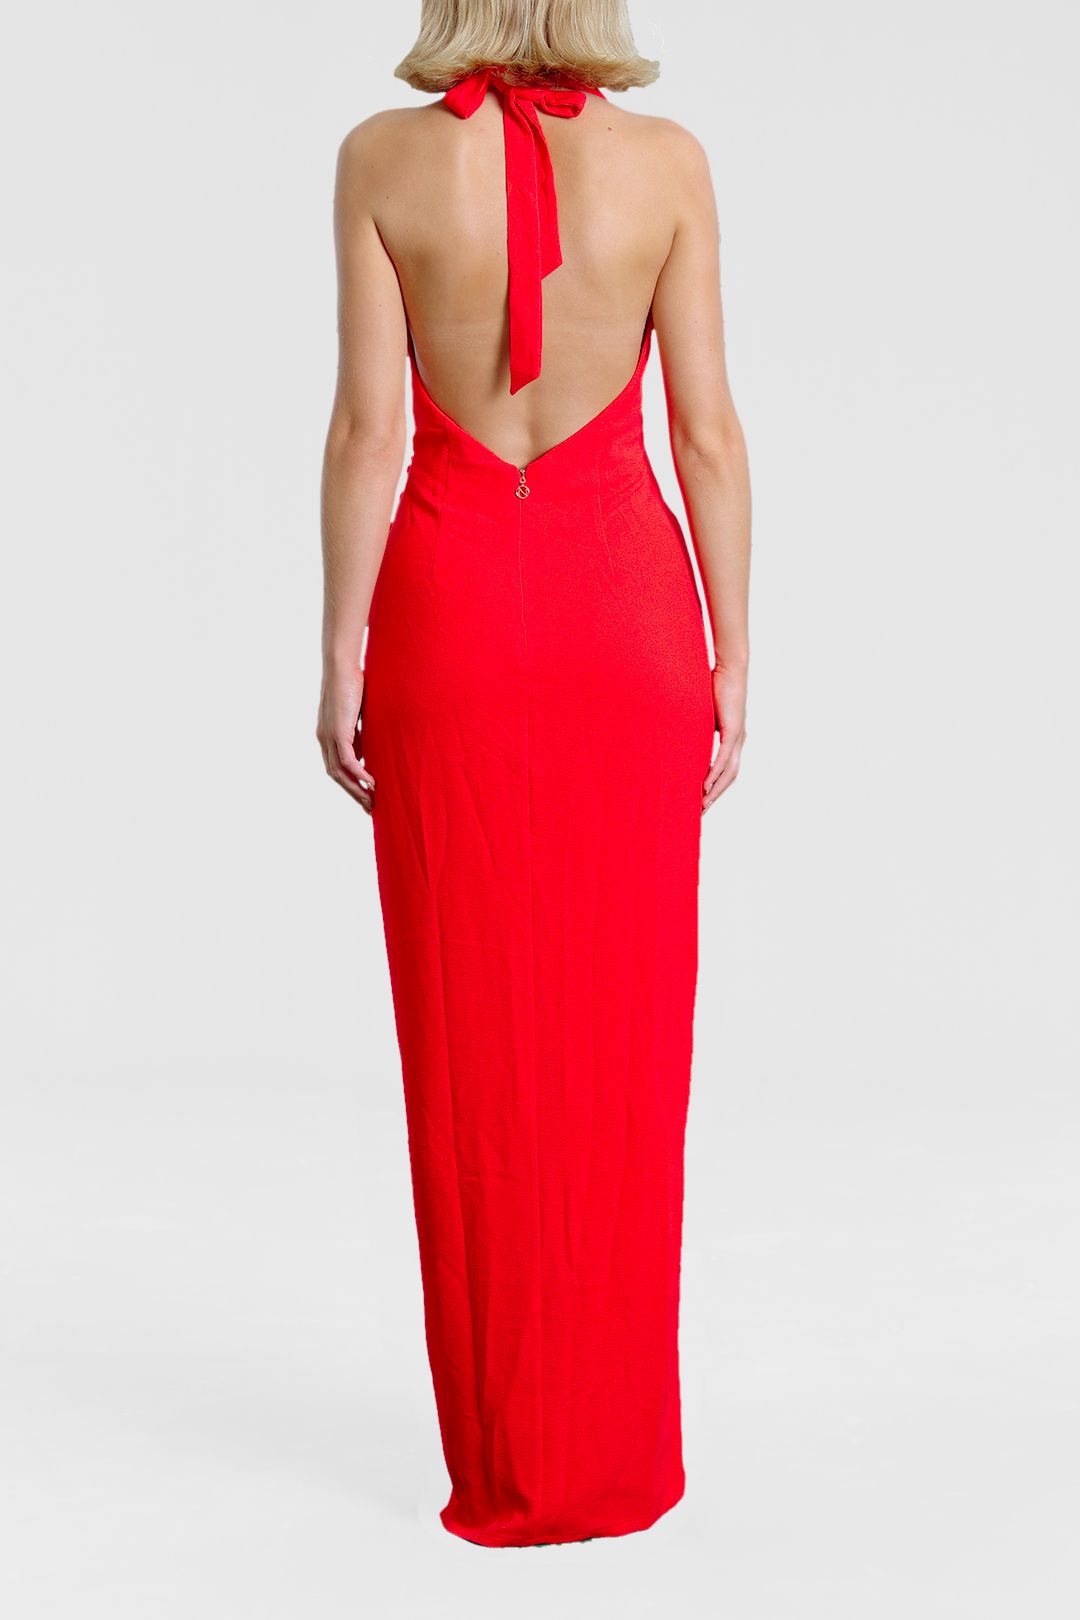 Nookie Amore Gown Red Backless